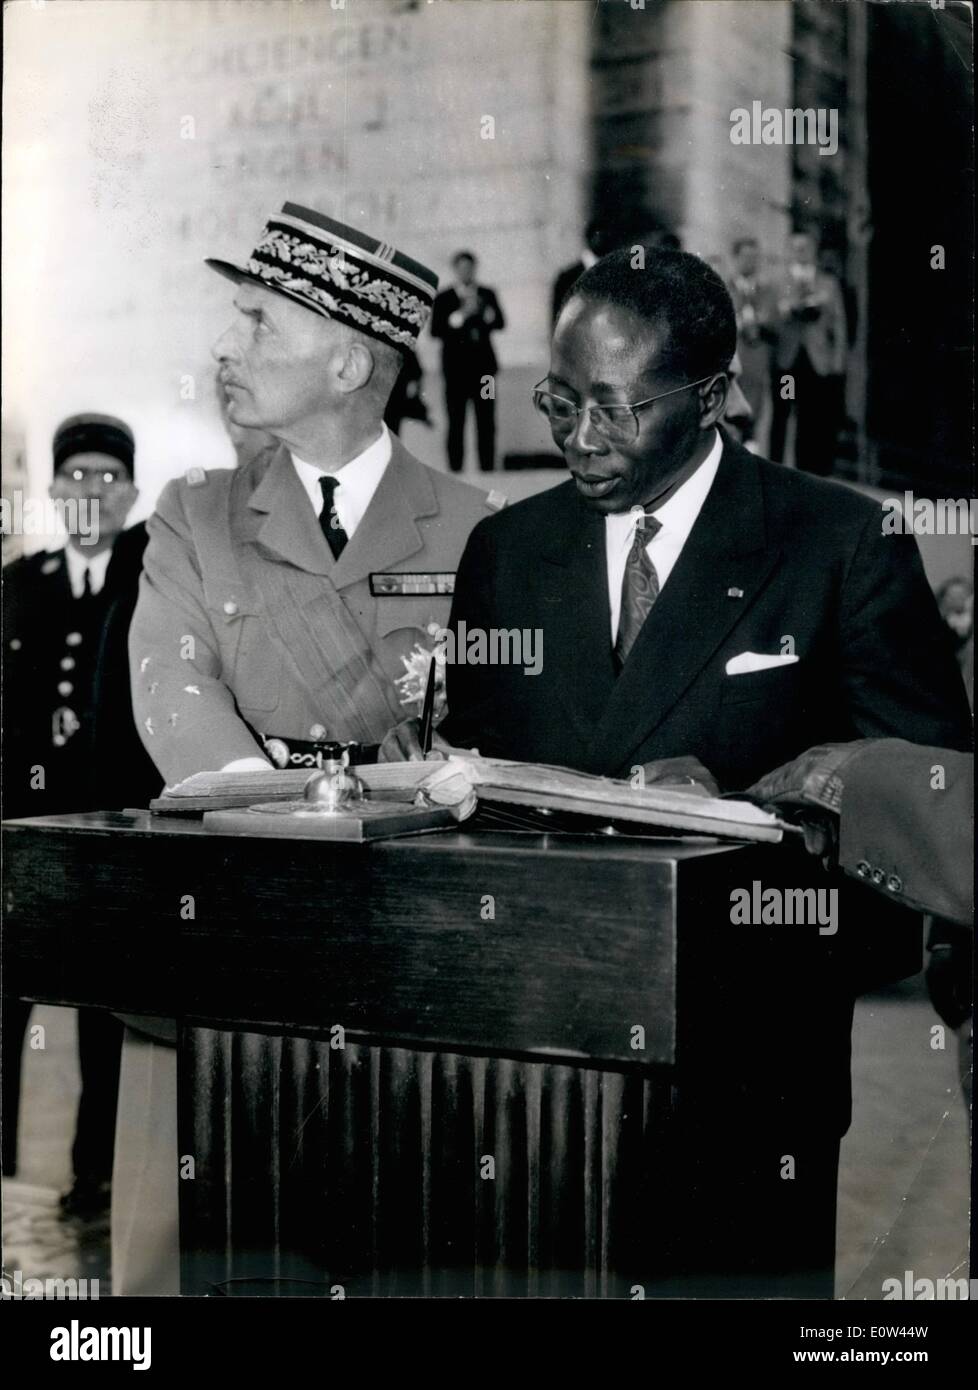 Apr. 04, 1961 - Senegal's President on State Visit to Paris: Photo shows M. Senghor, President of Senegal, Signing the Golden Book during the Ceremony at the Arc de Triomhe this afternoon. Stock Photo